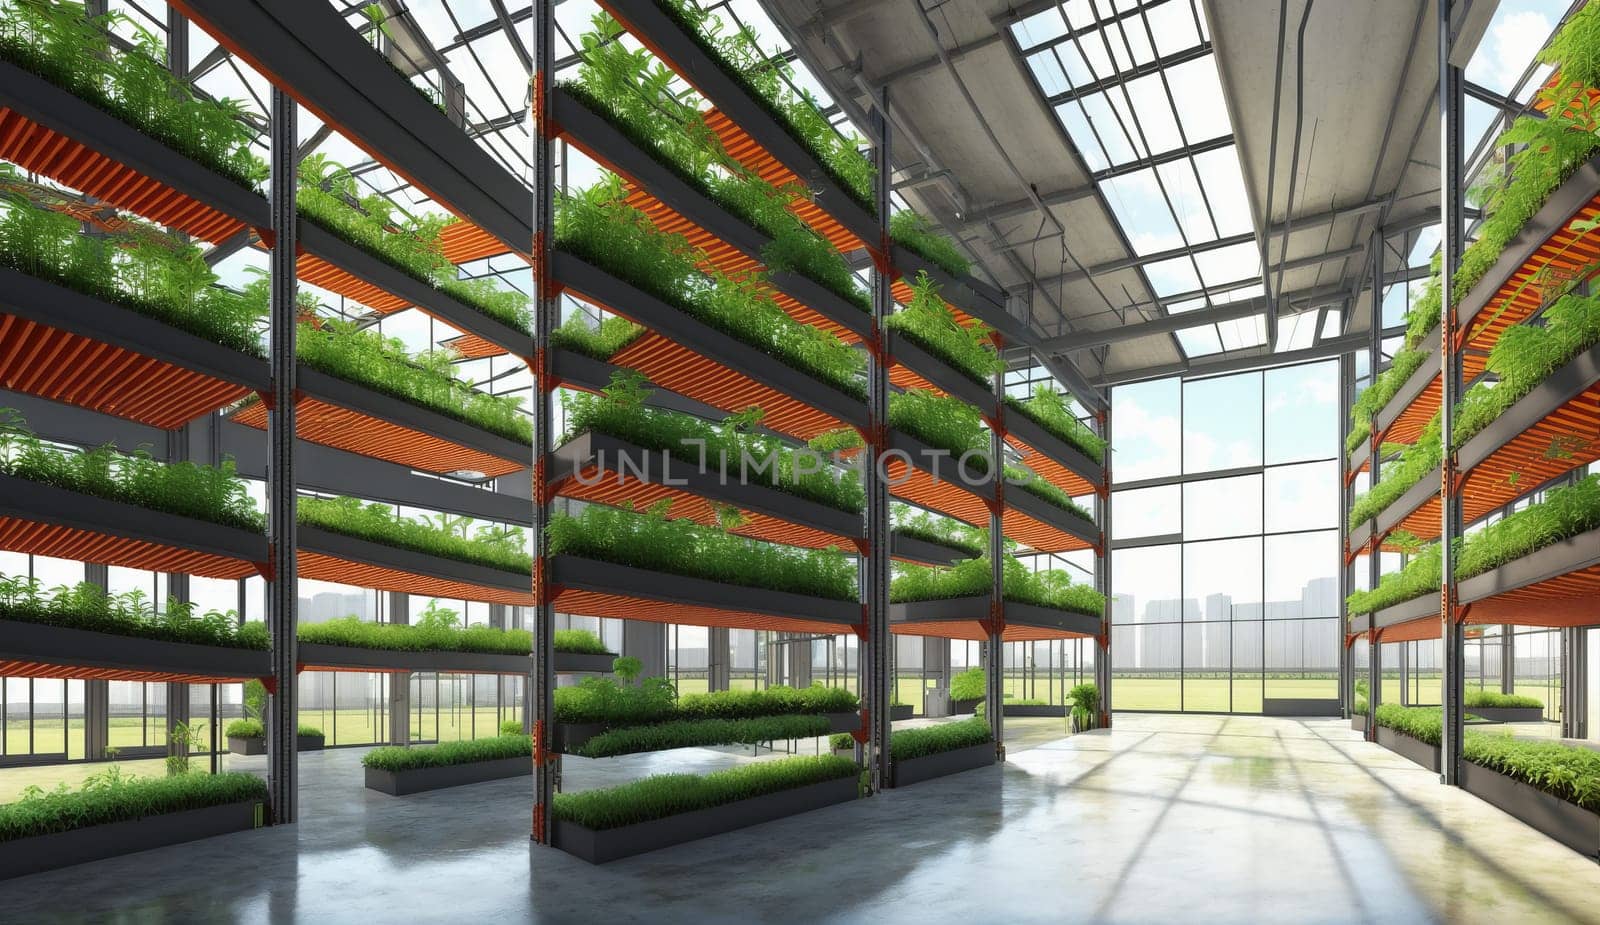 An artists interpretation of a glass greenhouse overflowing with a variety of plants, creating a beautiful urban design fixture with a facade of greenery